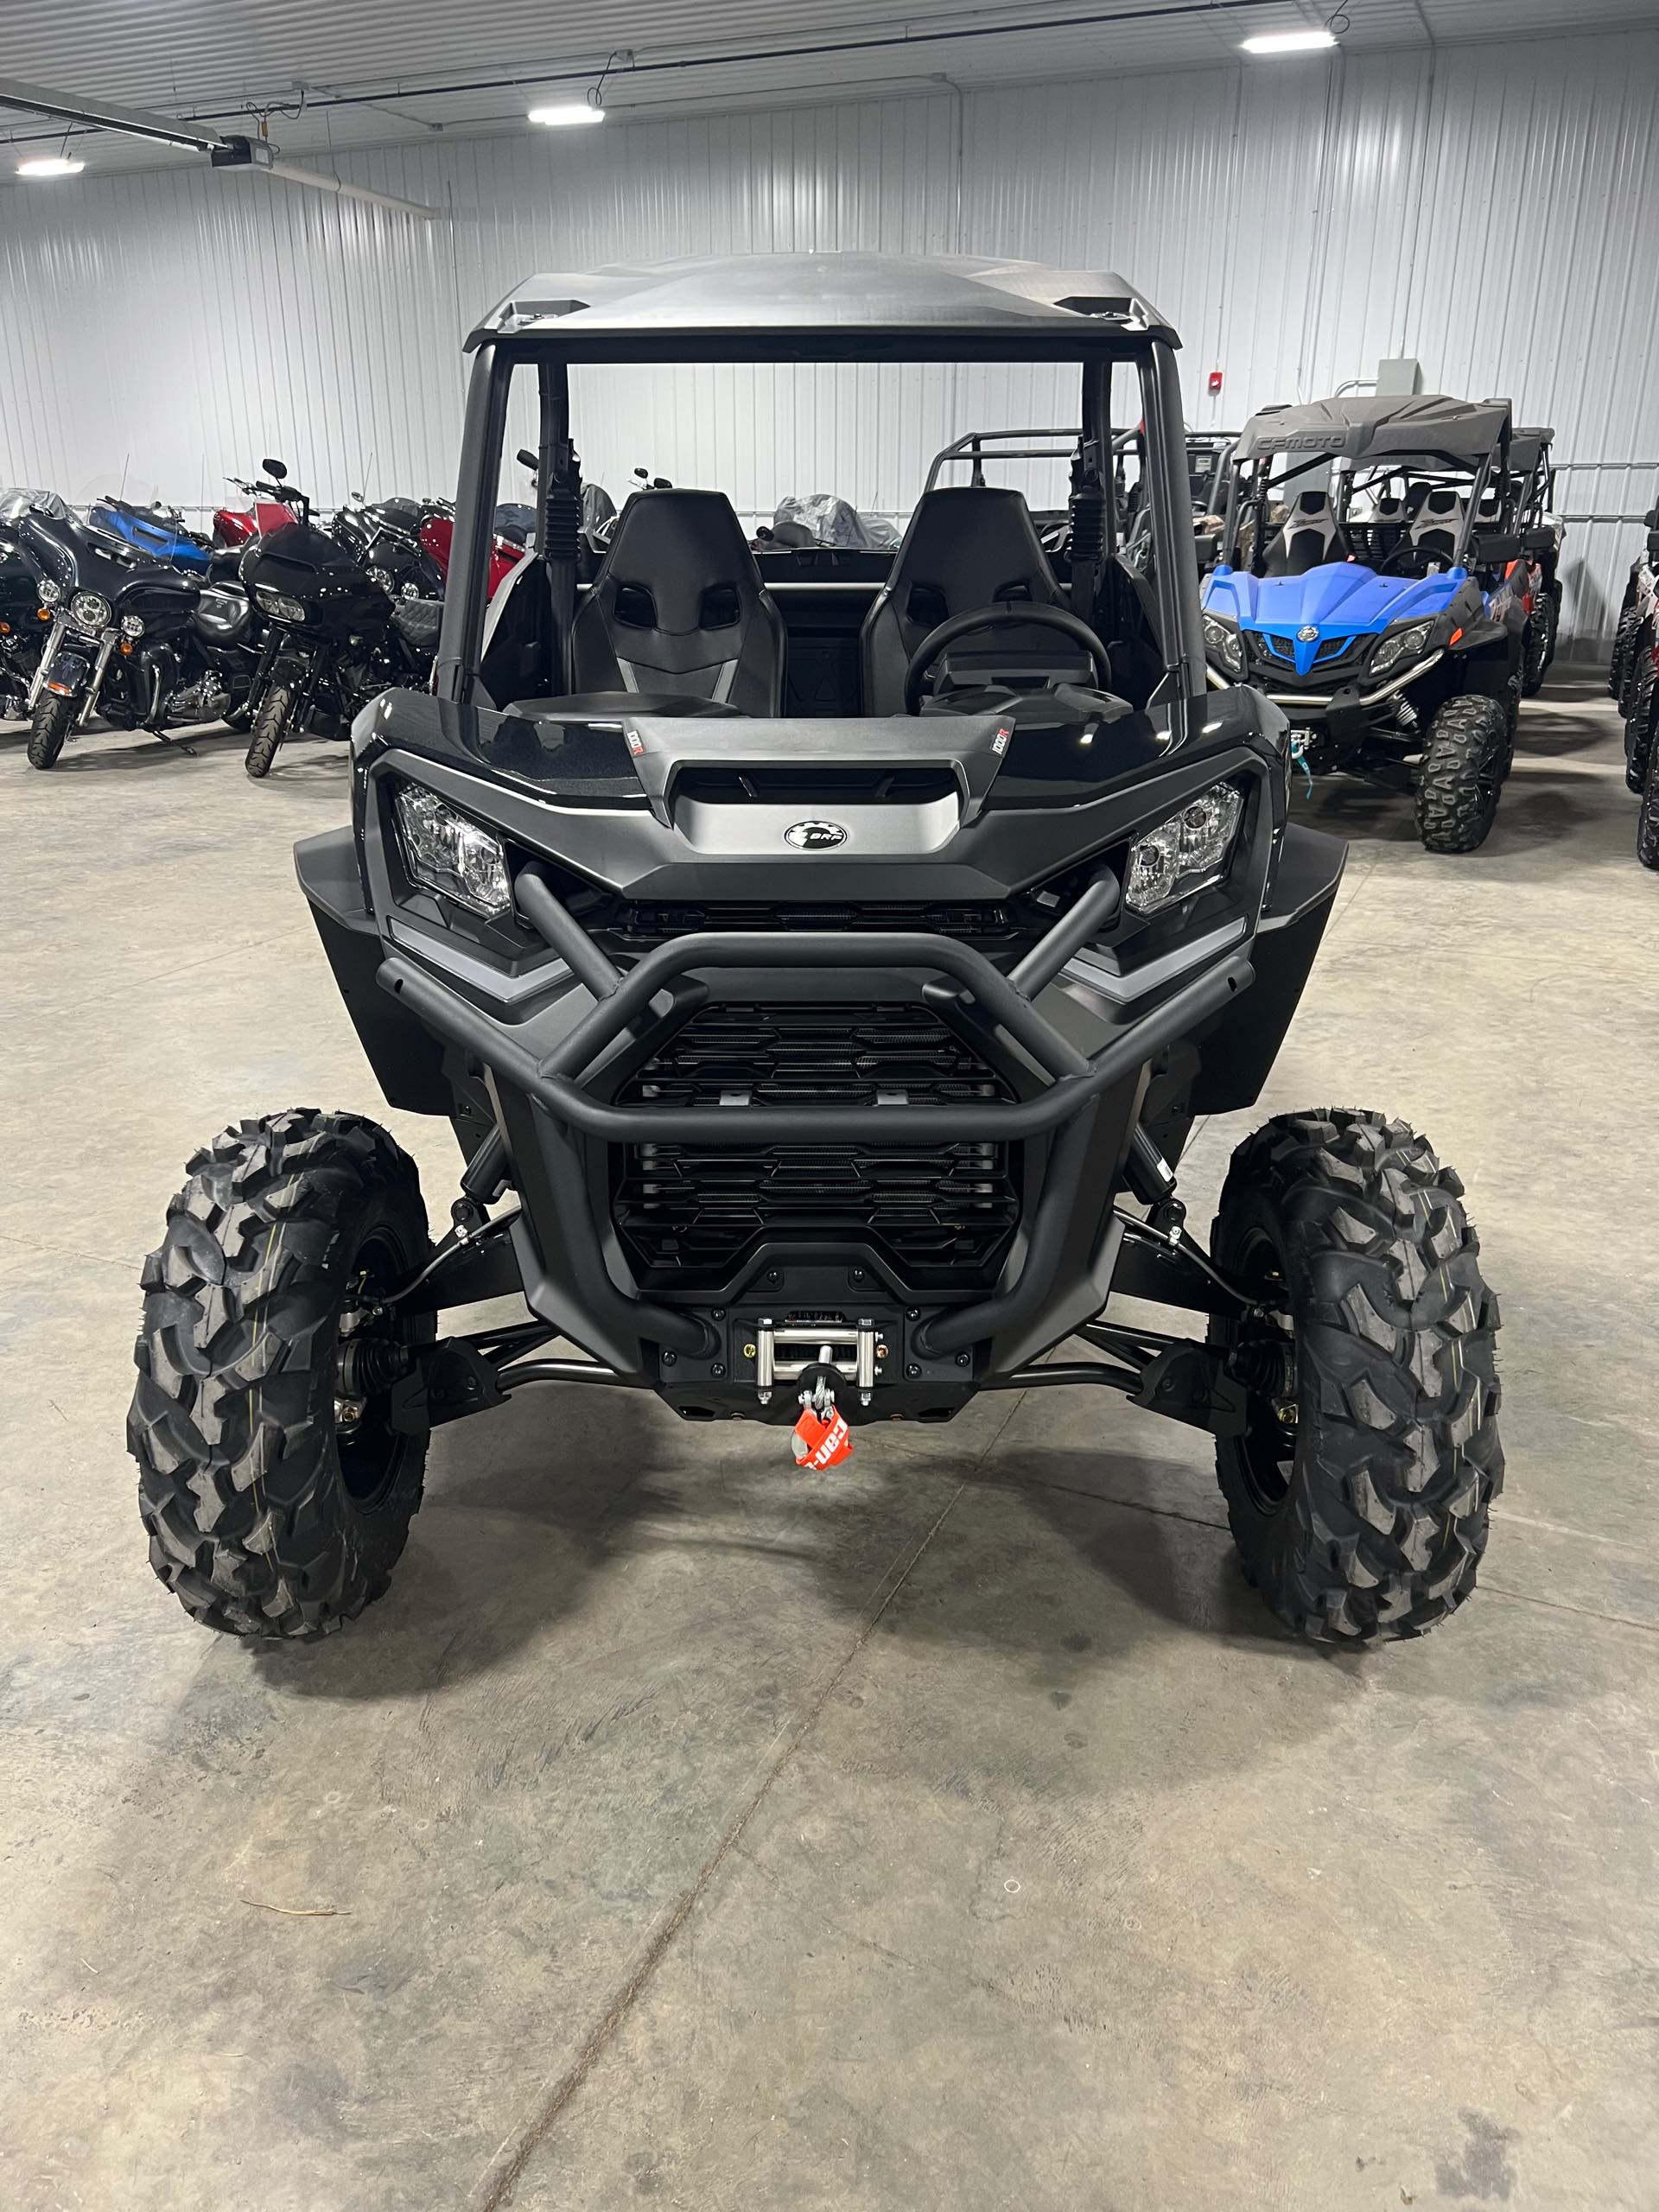 2023 Can-Am Commander XT 1000R at Iron Hill Powersports